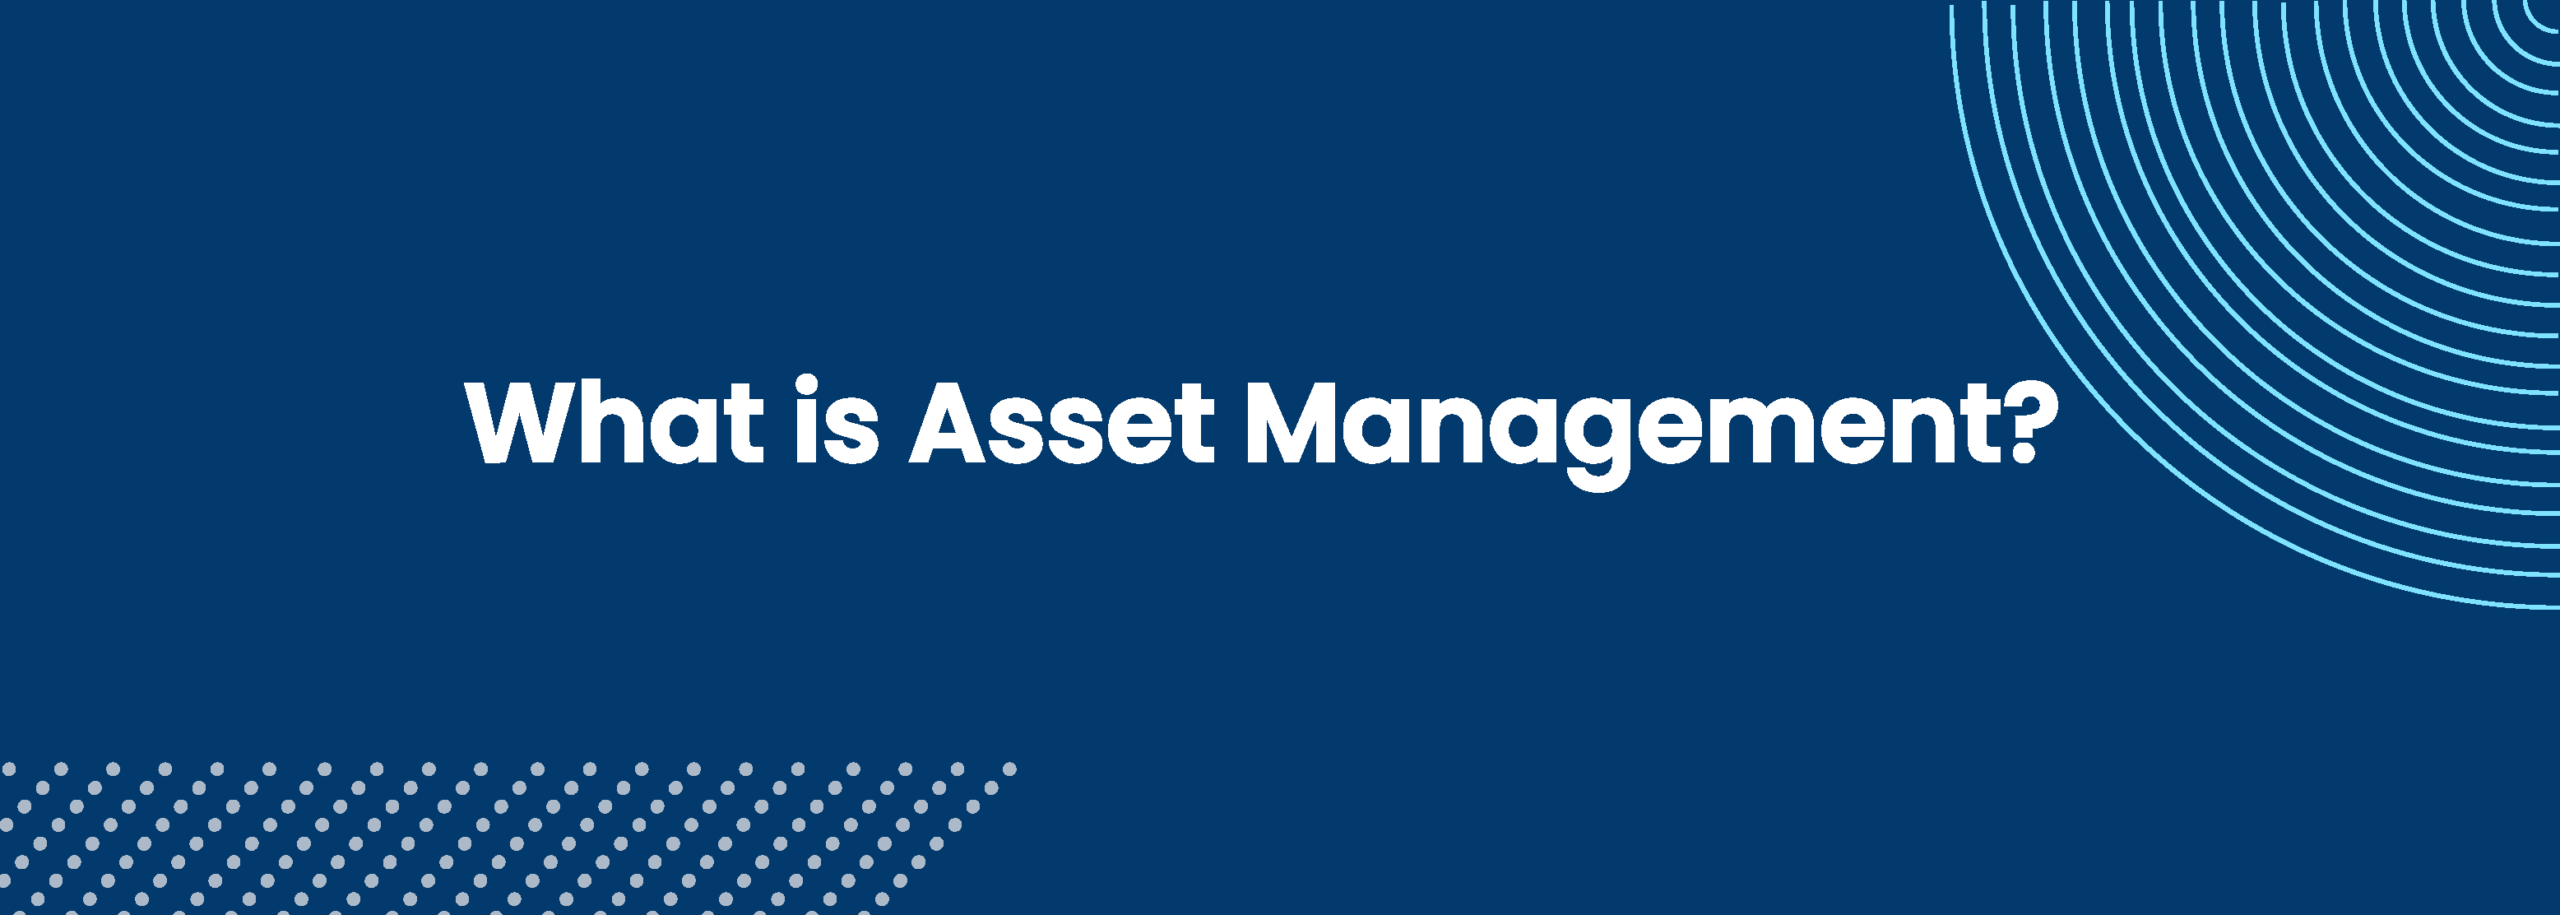 Asset management is the process of identifying, acquiring, and maintaining assets to maximize their value to an organization.